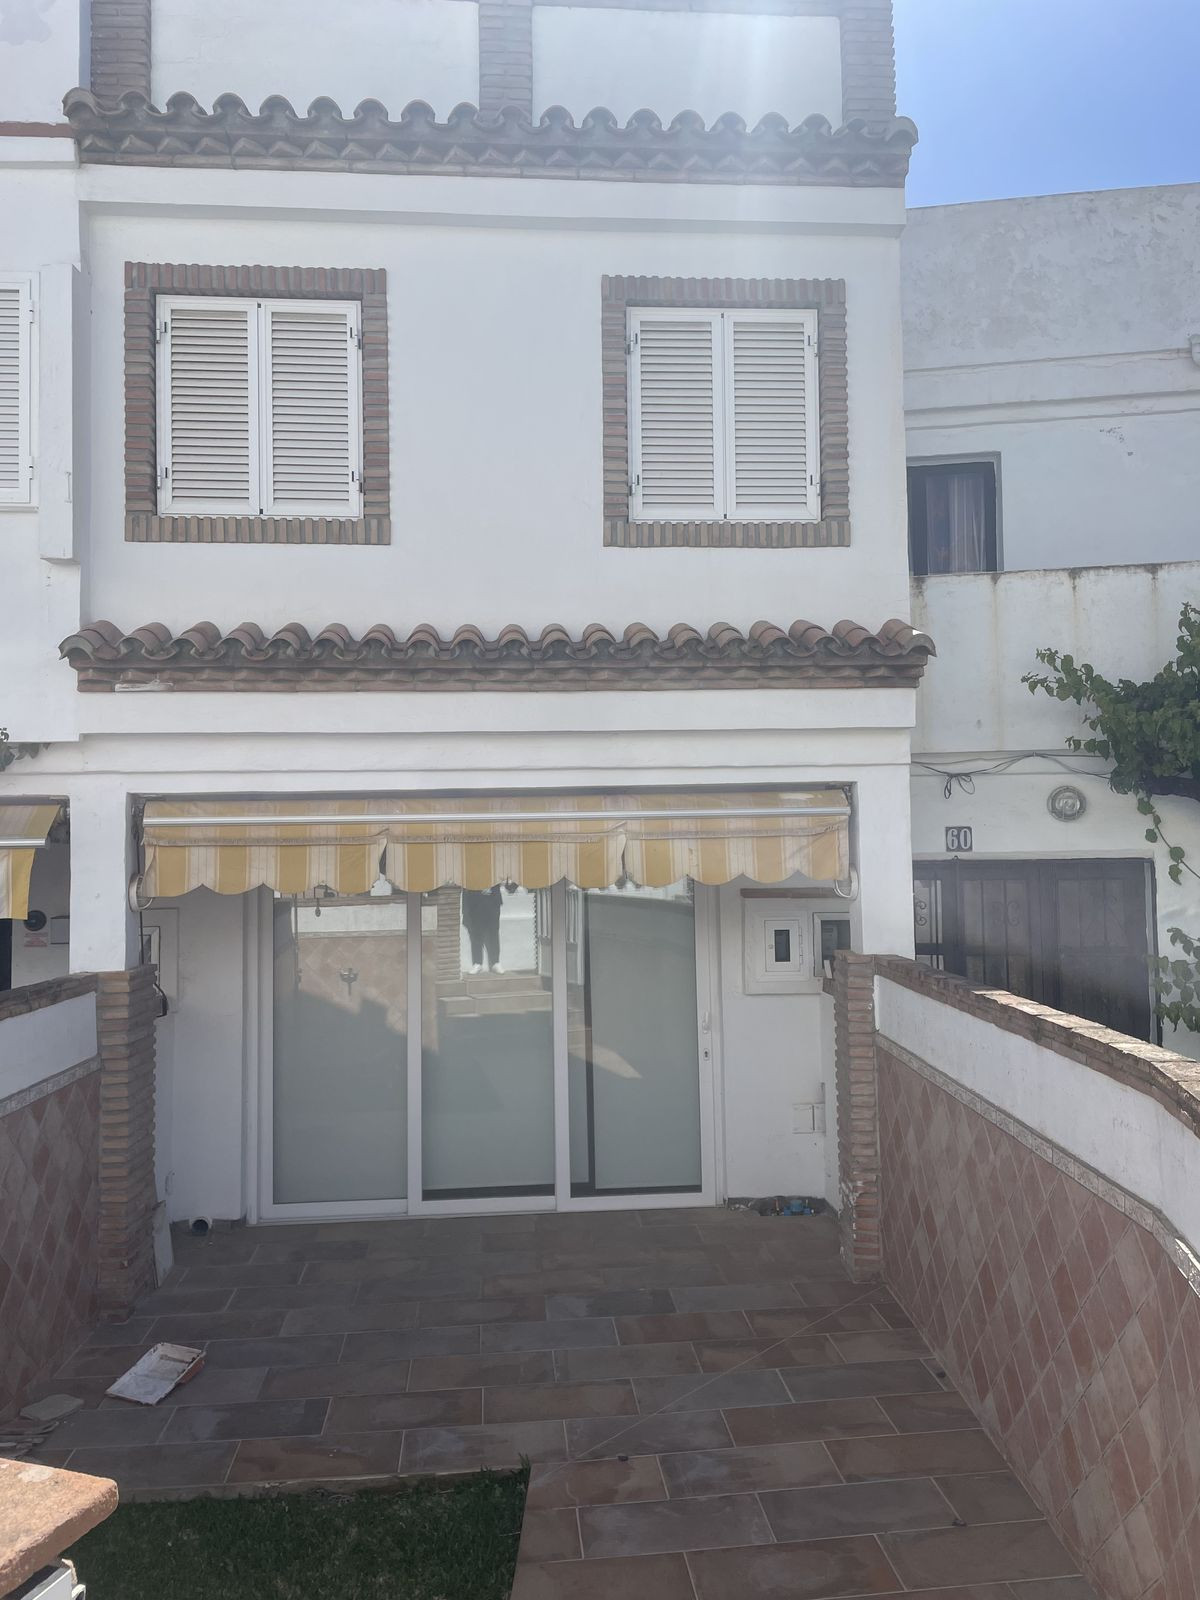 						Townhouse  Terraced
													for sale 
																			 in Manilva
					